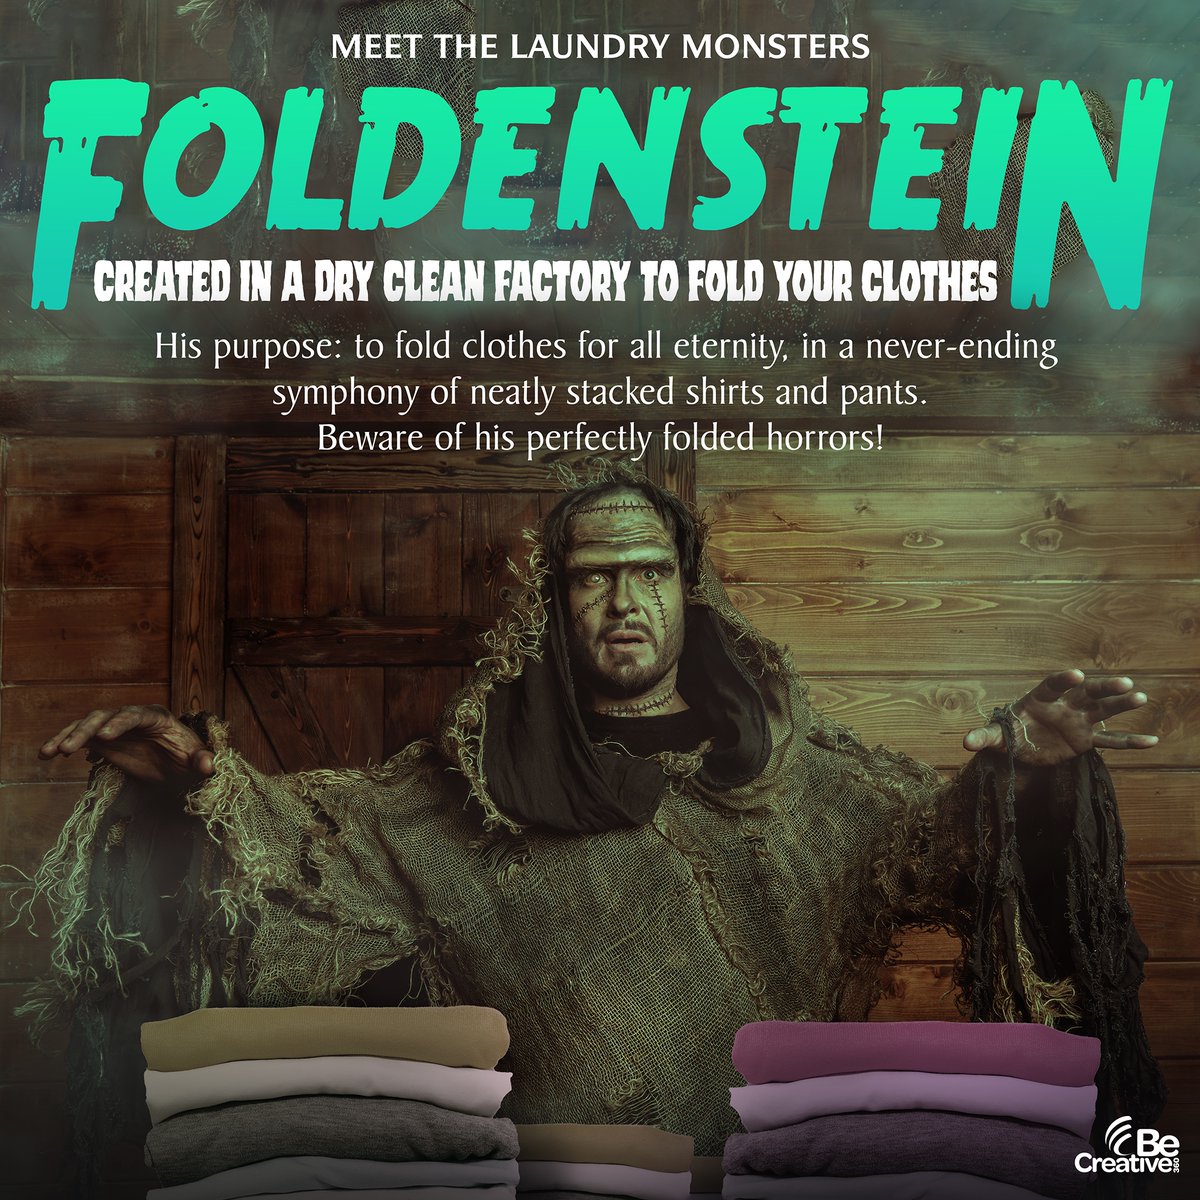 Meet one of our #laundrymonsters - Foldenstein! Created in a dry cleaning factory, this monster has one goal - to provide you with endless perfectly folded clothing. 🧟‍♂️ 
Visit konacleaners.com to get scary good deals on laundering and dry cleaning. #ScaryGood